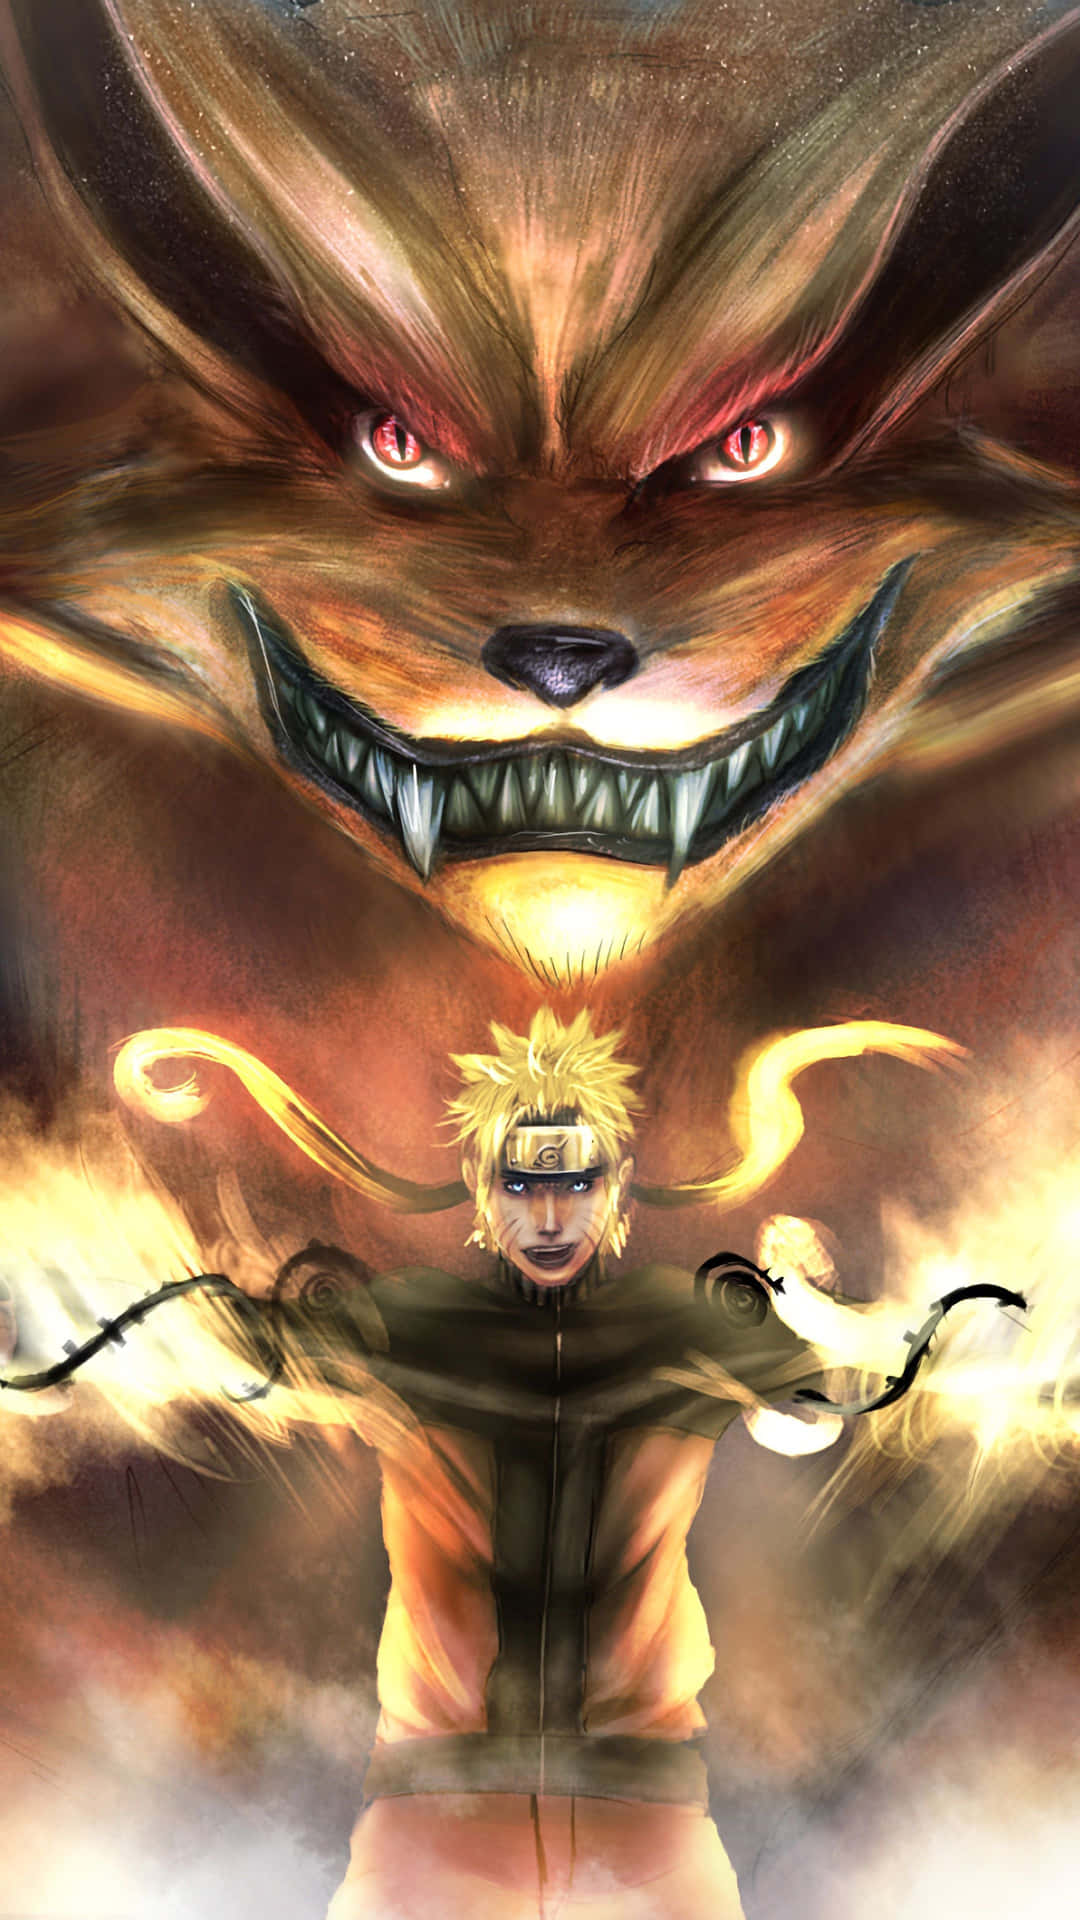 The power of Naruto unleashed in this epic phone background